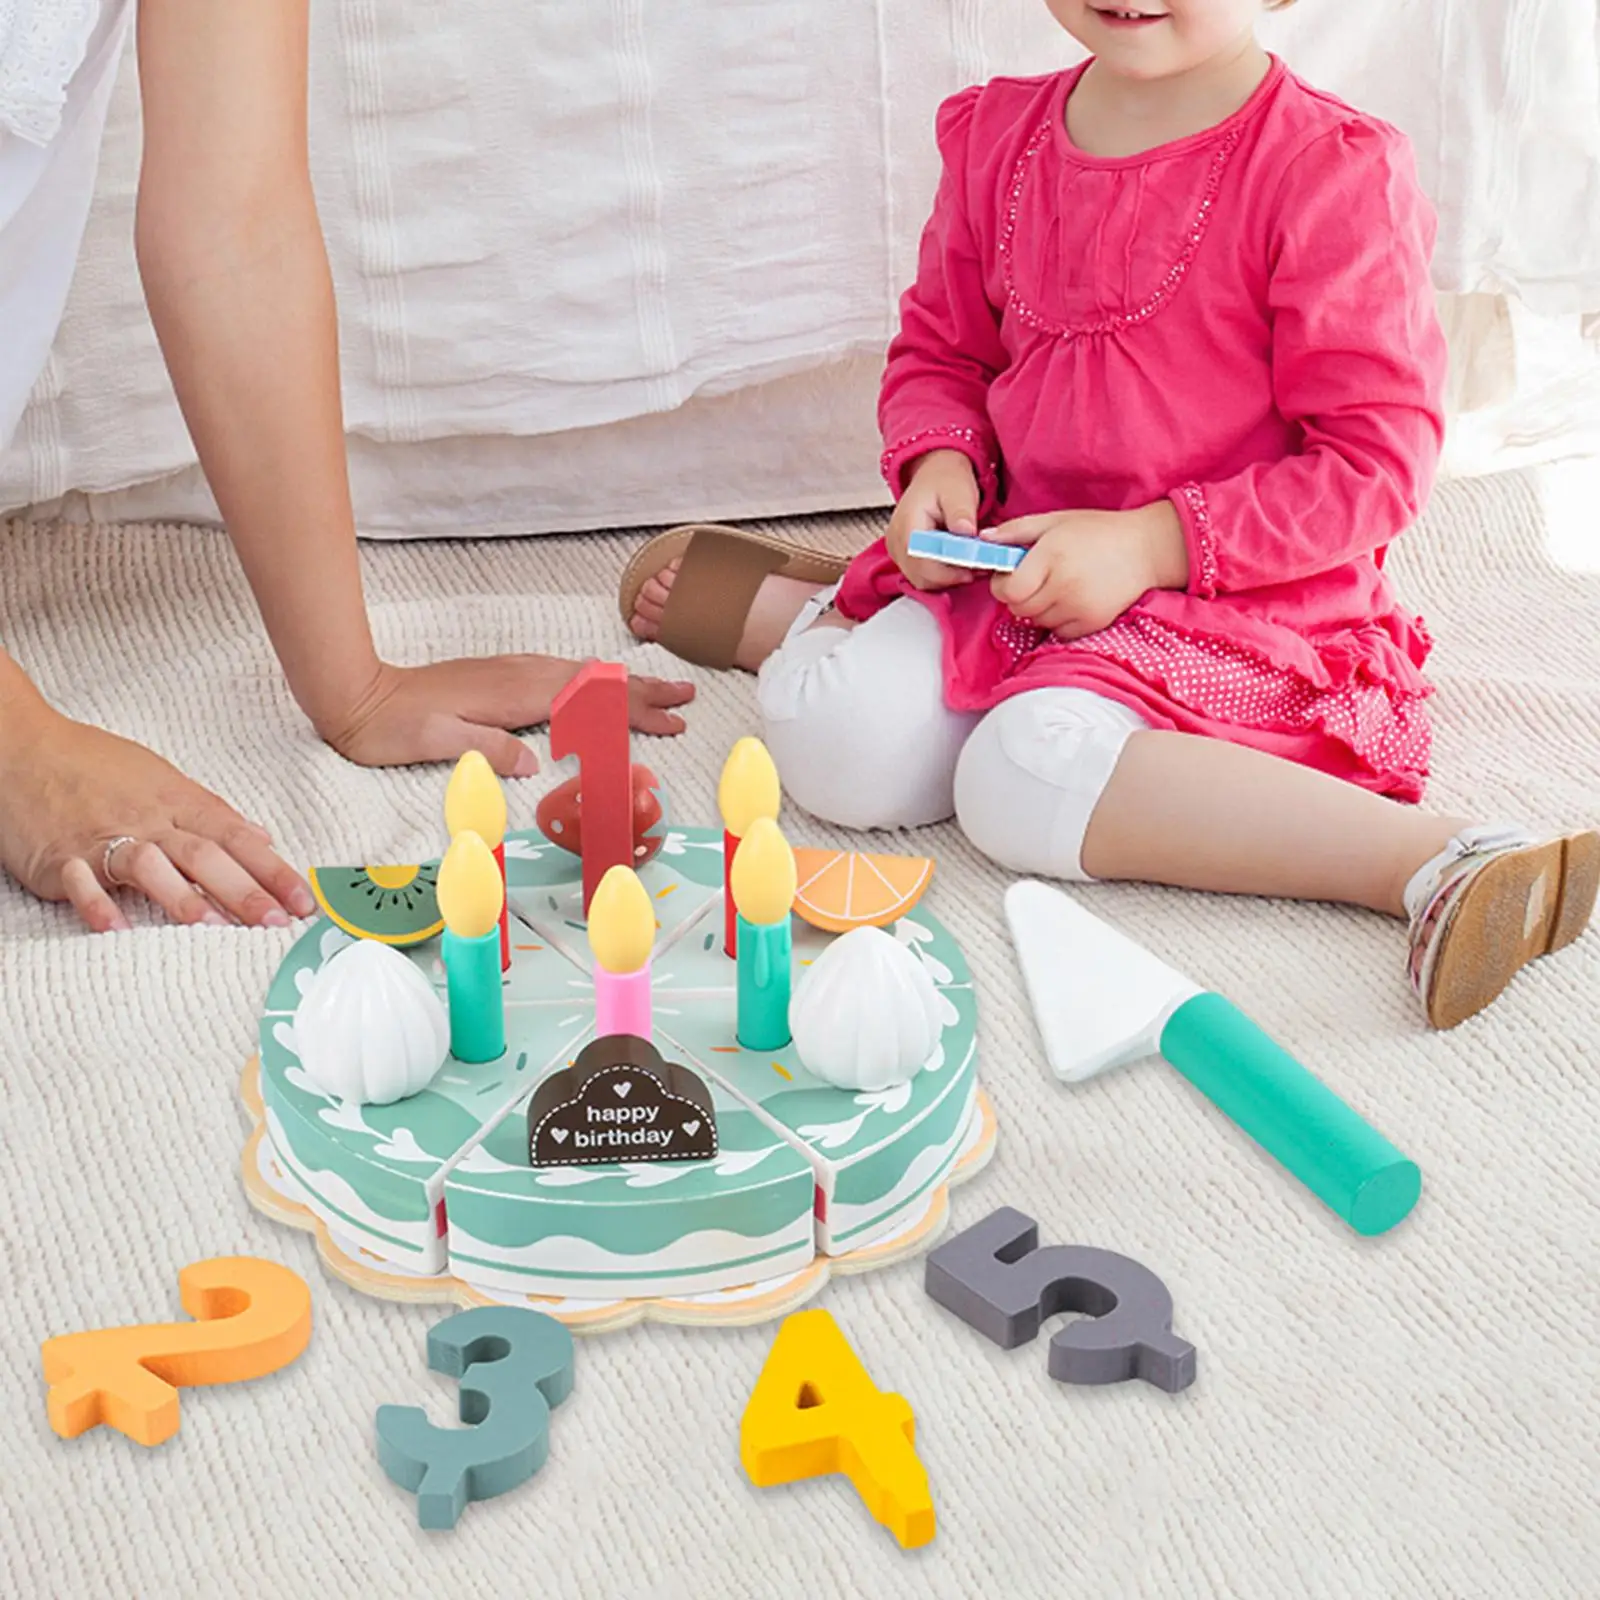 Birthday Cake Cutting Toy Gift Playset with Candles Fruit Accessories for Girls and Boys Kids Toddlers Preschool Children